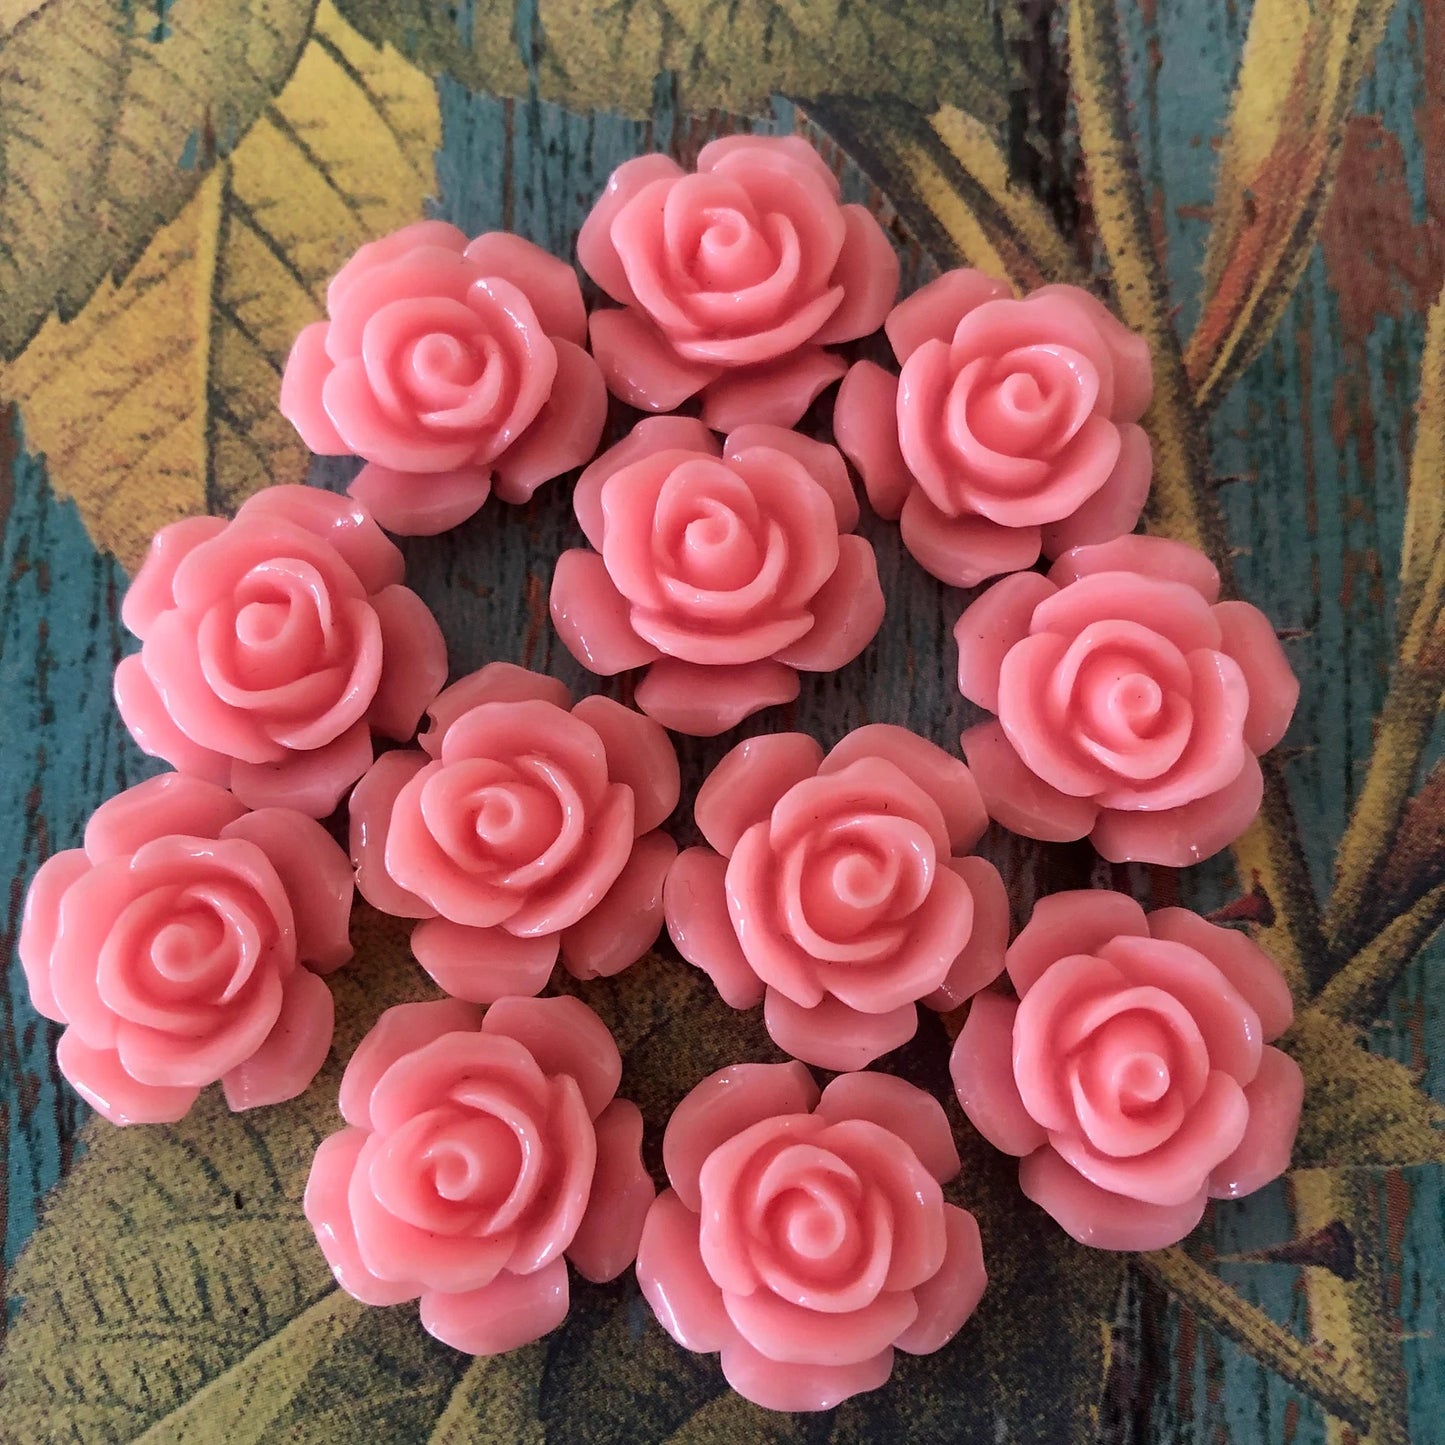 12 Resin Coral Roses - 14 mm Cabochon Supply - Scrapbooking, Jewelry, Kawaii, Collage Flowers Floral Pink Orange